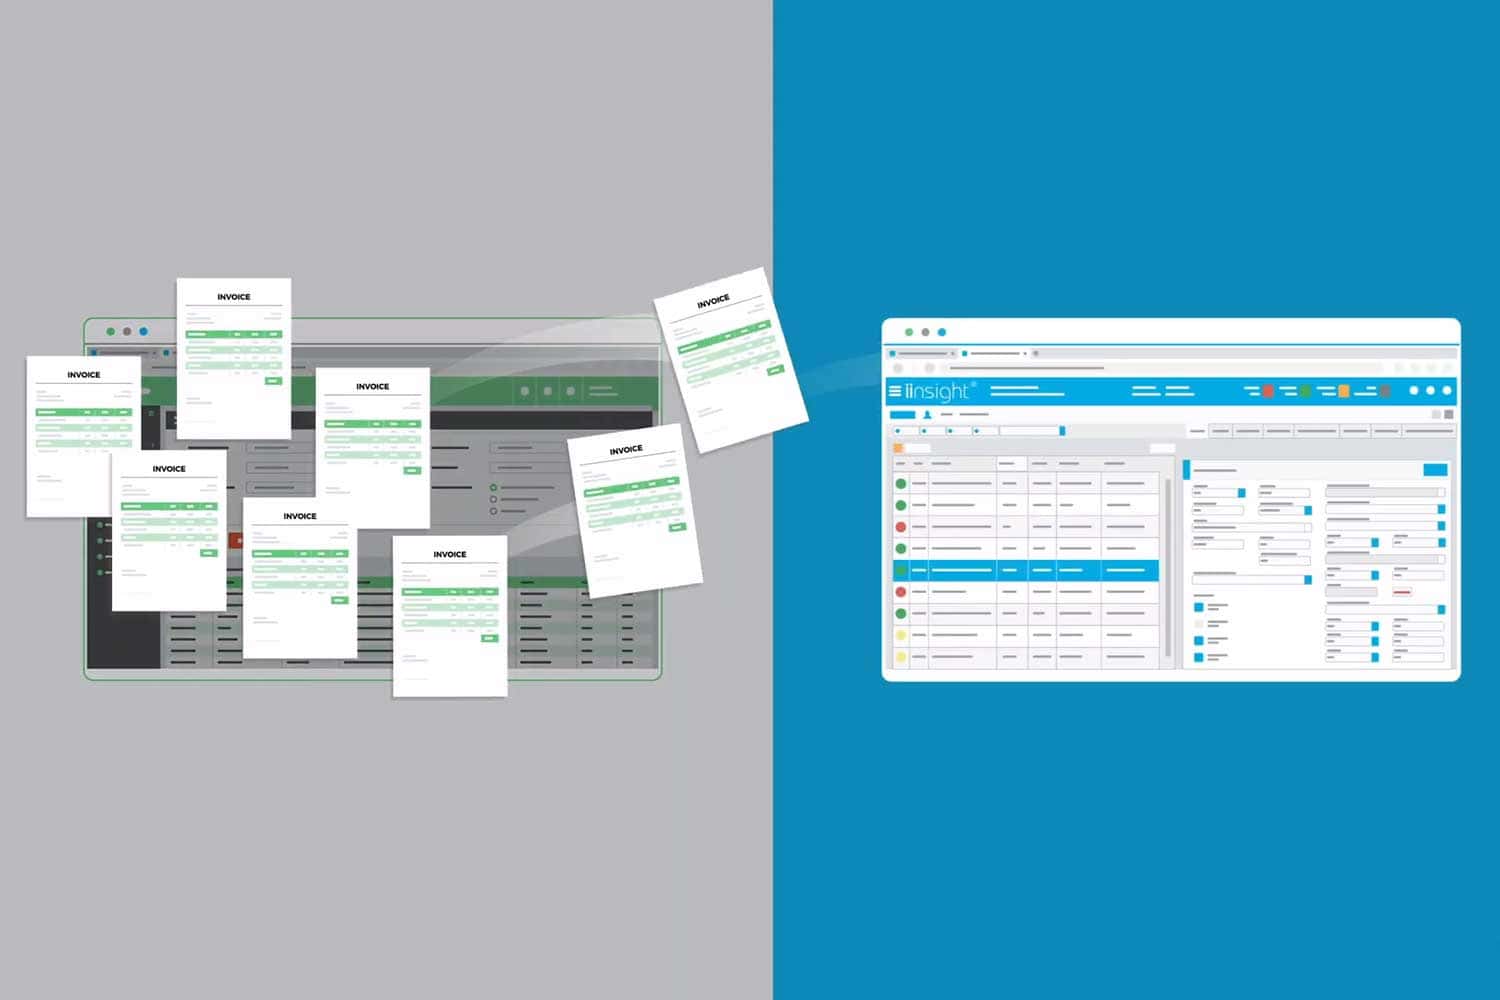 insight allows you to personalise your invoices with your own branding and logos